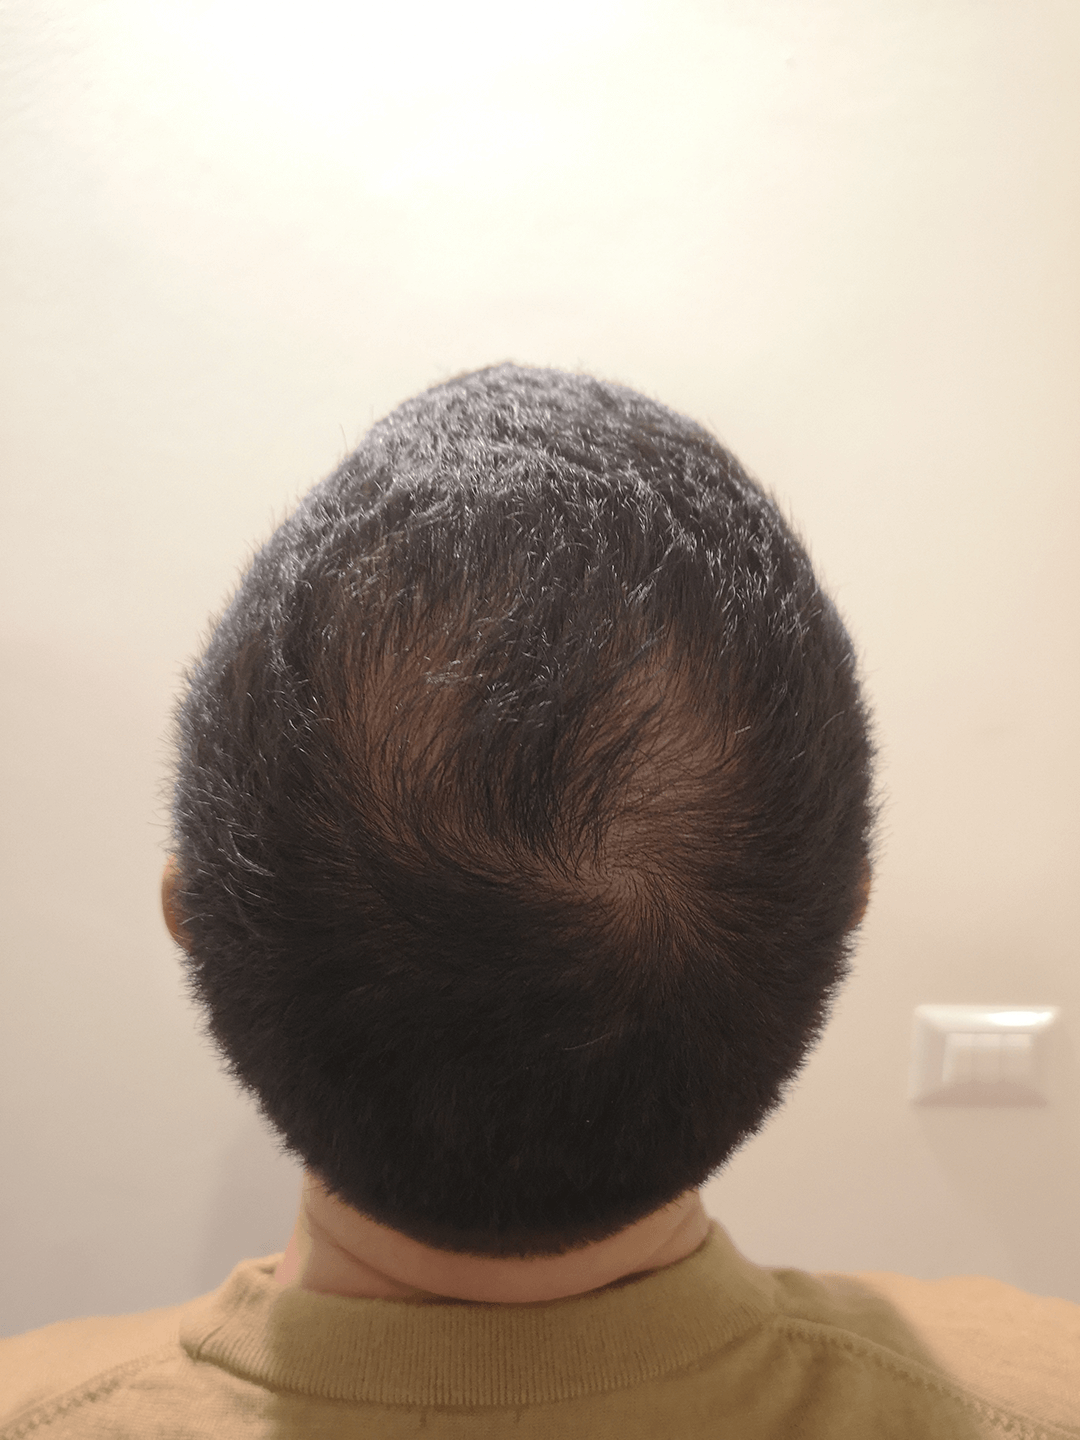 Early Thinning and Hair Loss on Crown Area